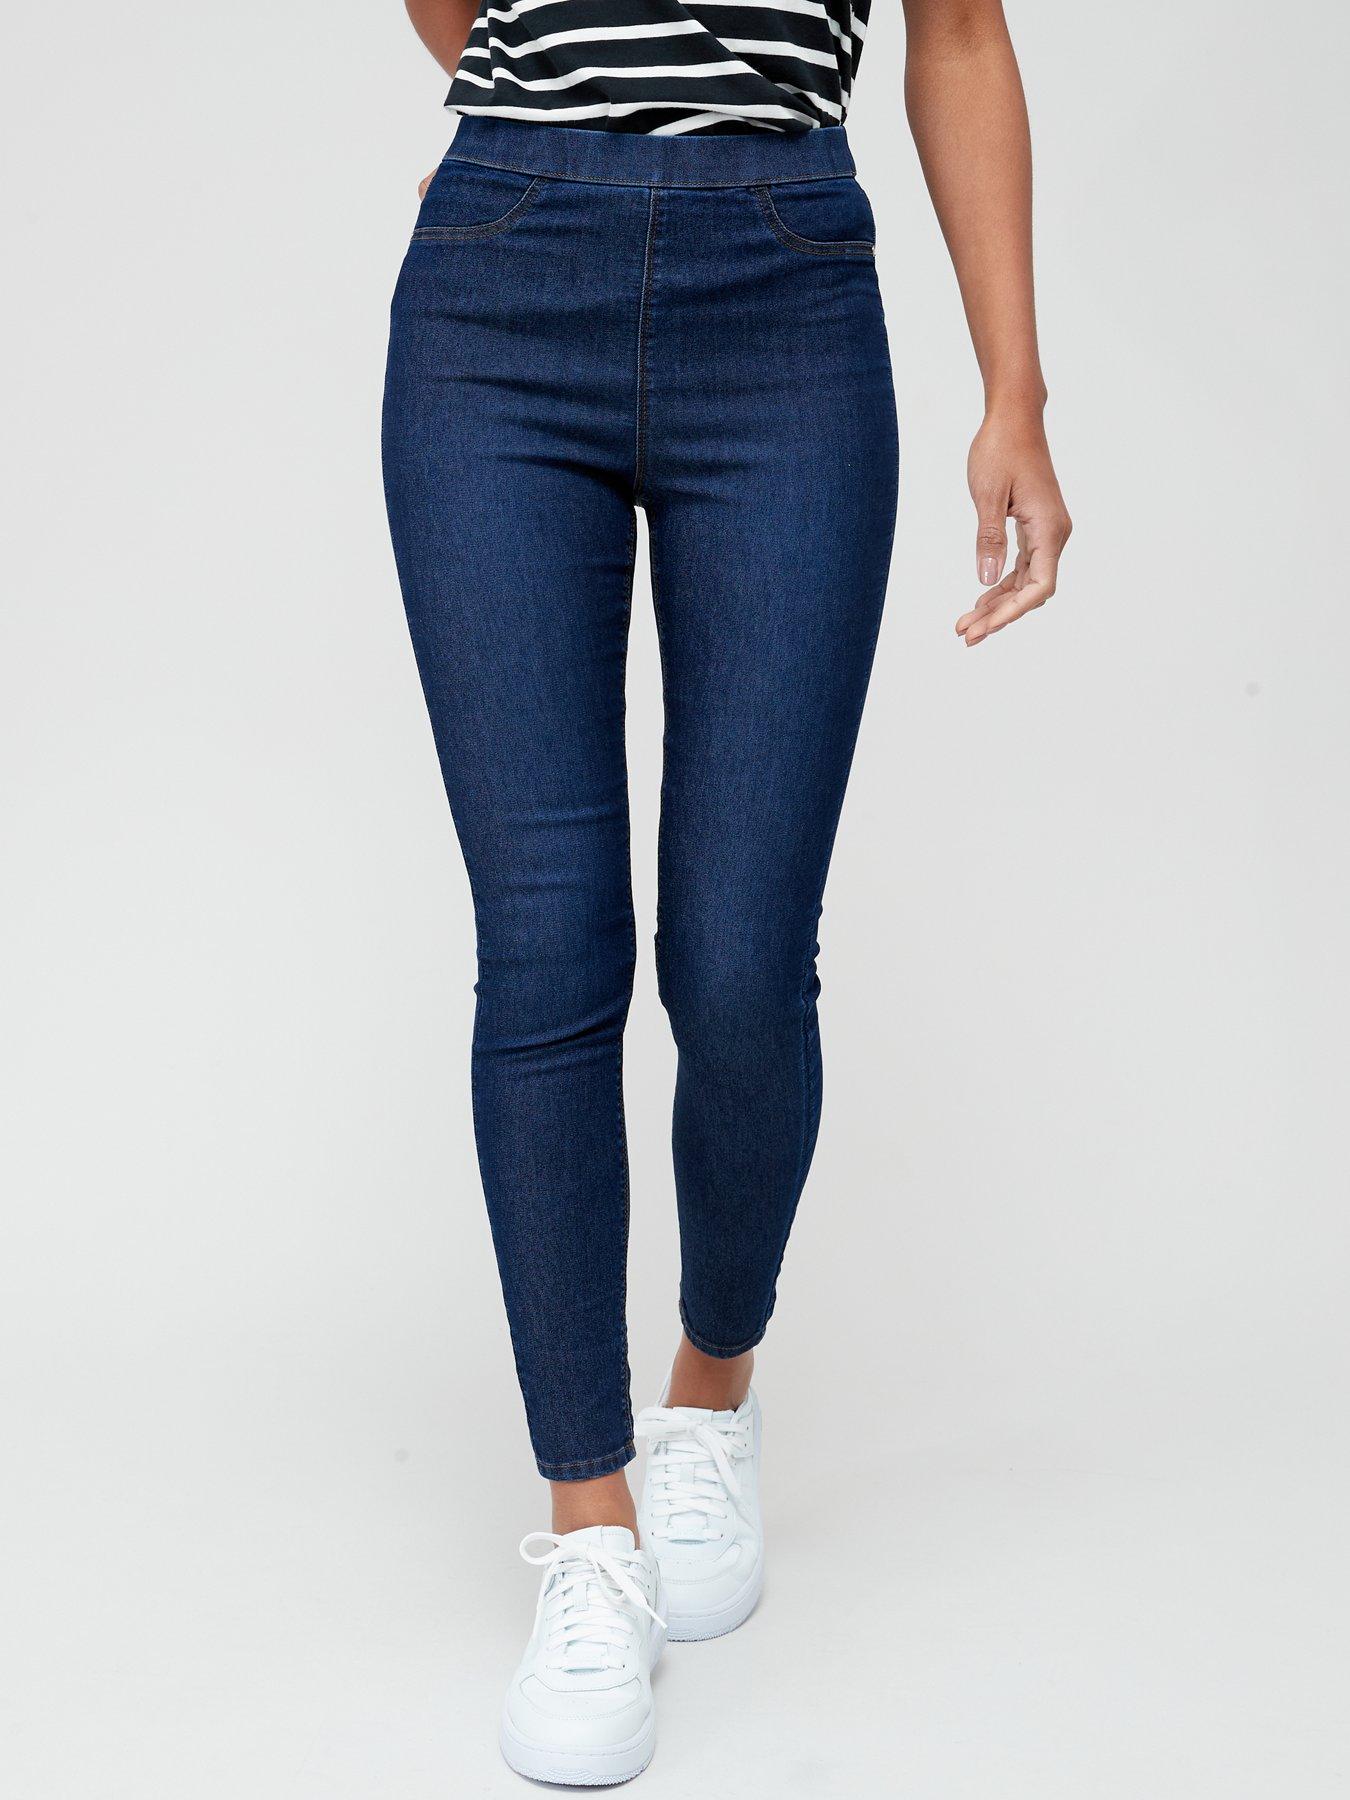 Just Love Women's Denim Jeggings with Pockets - Comfortable